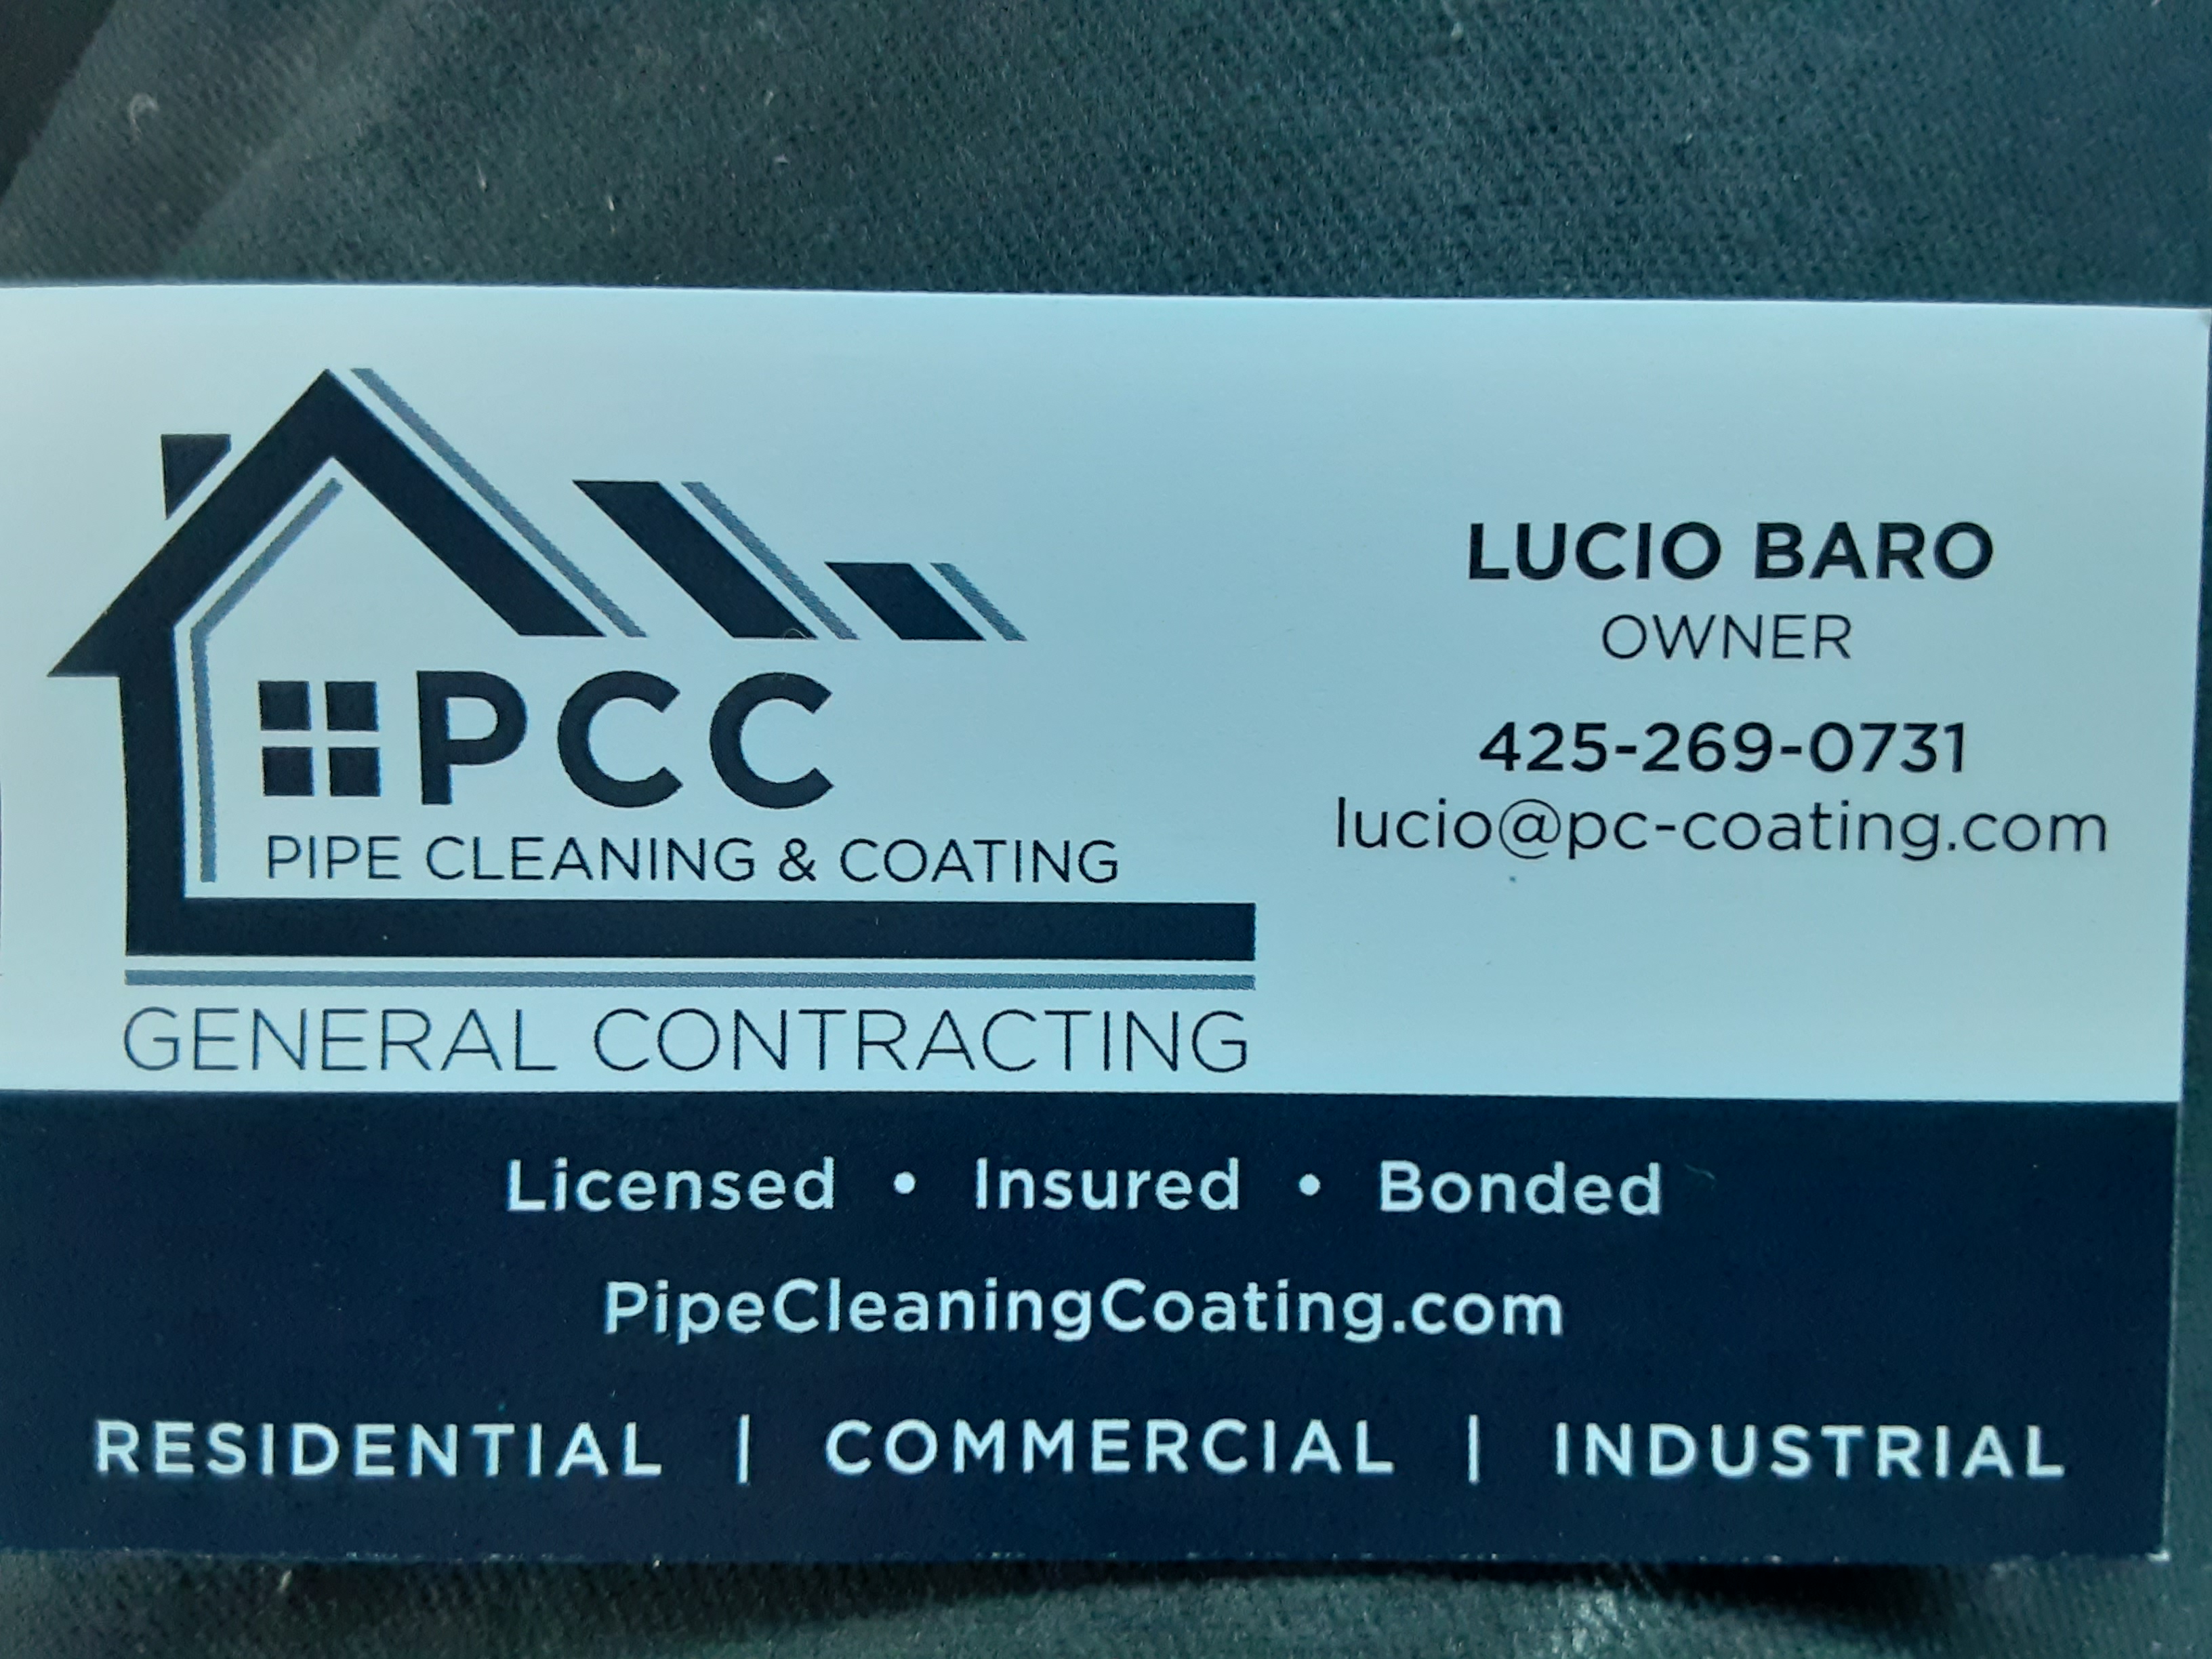 Pipe Cleaning & Coating PCC Logo